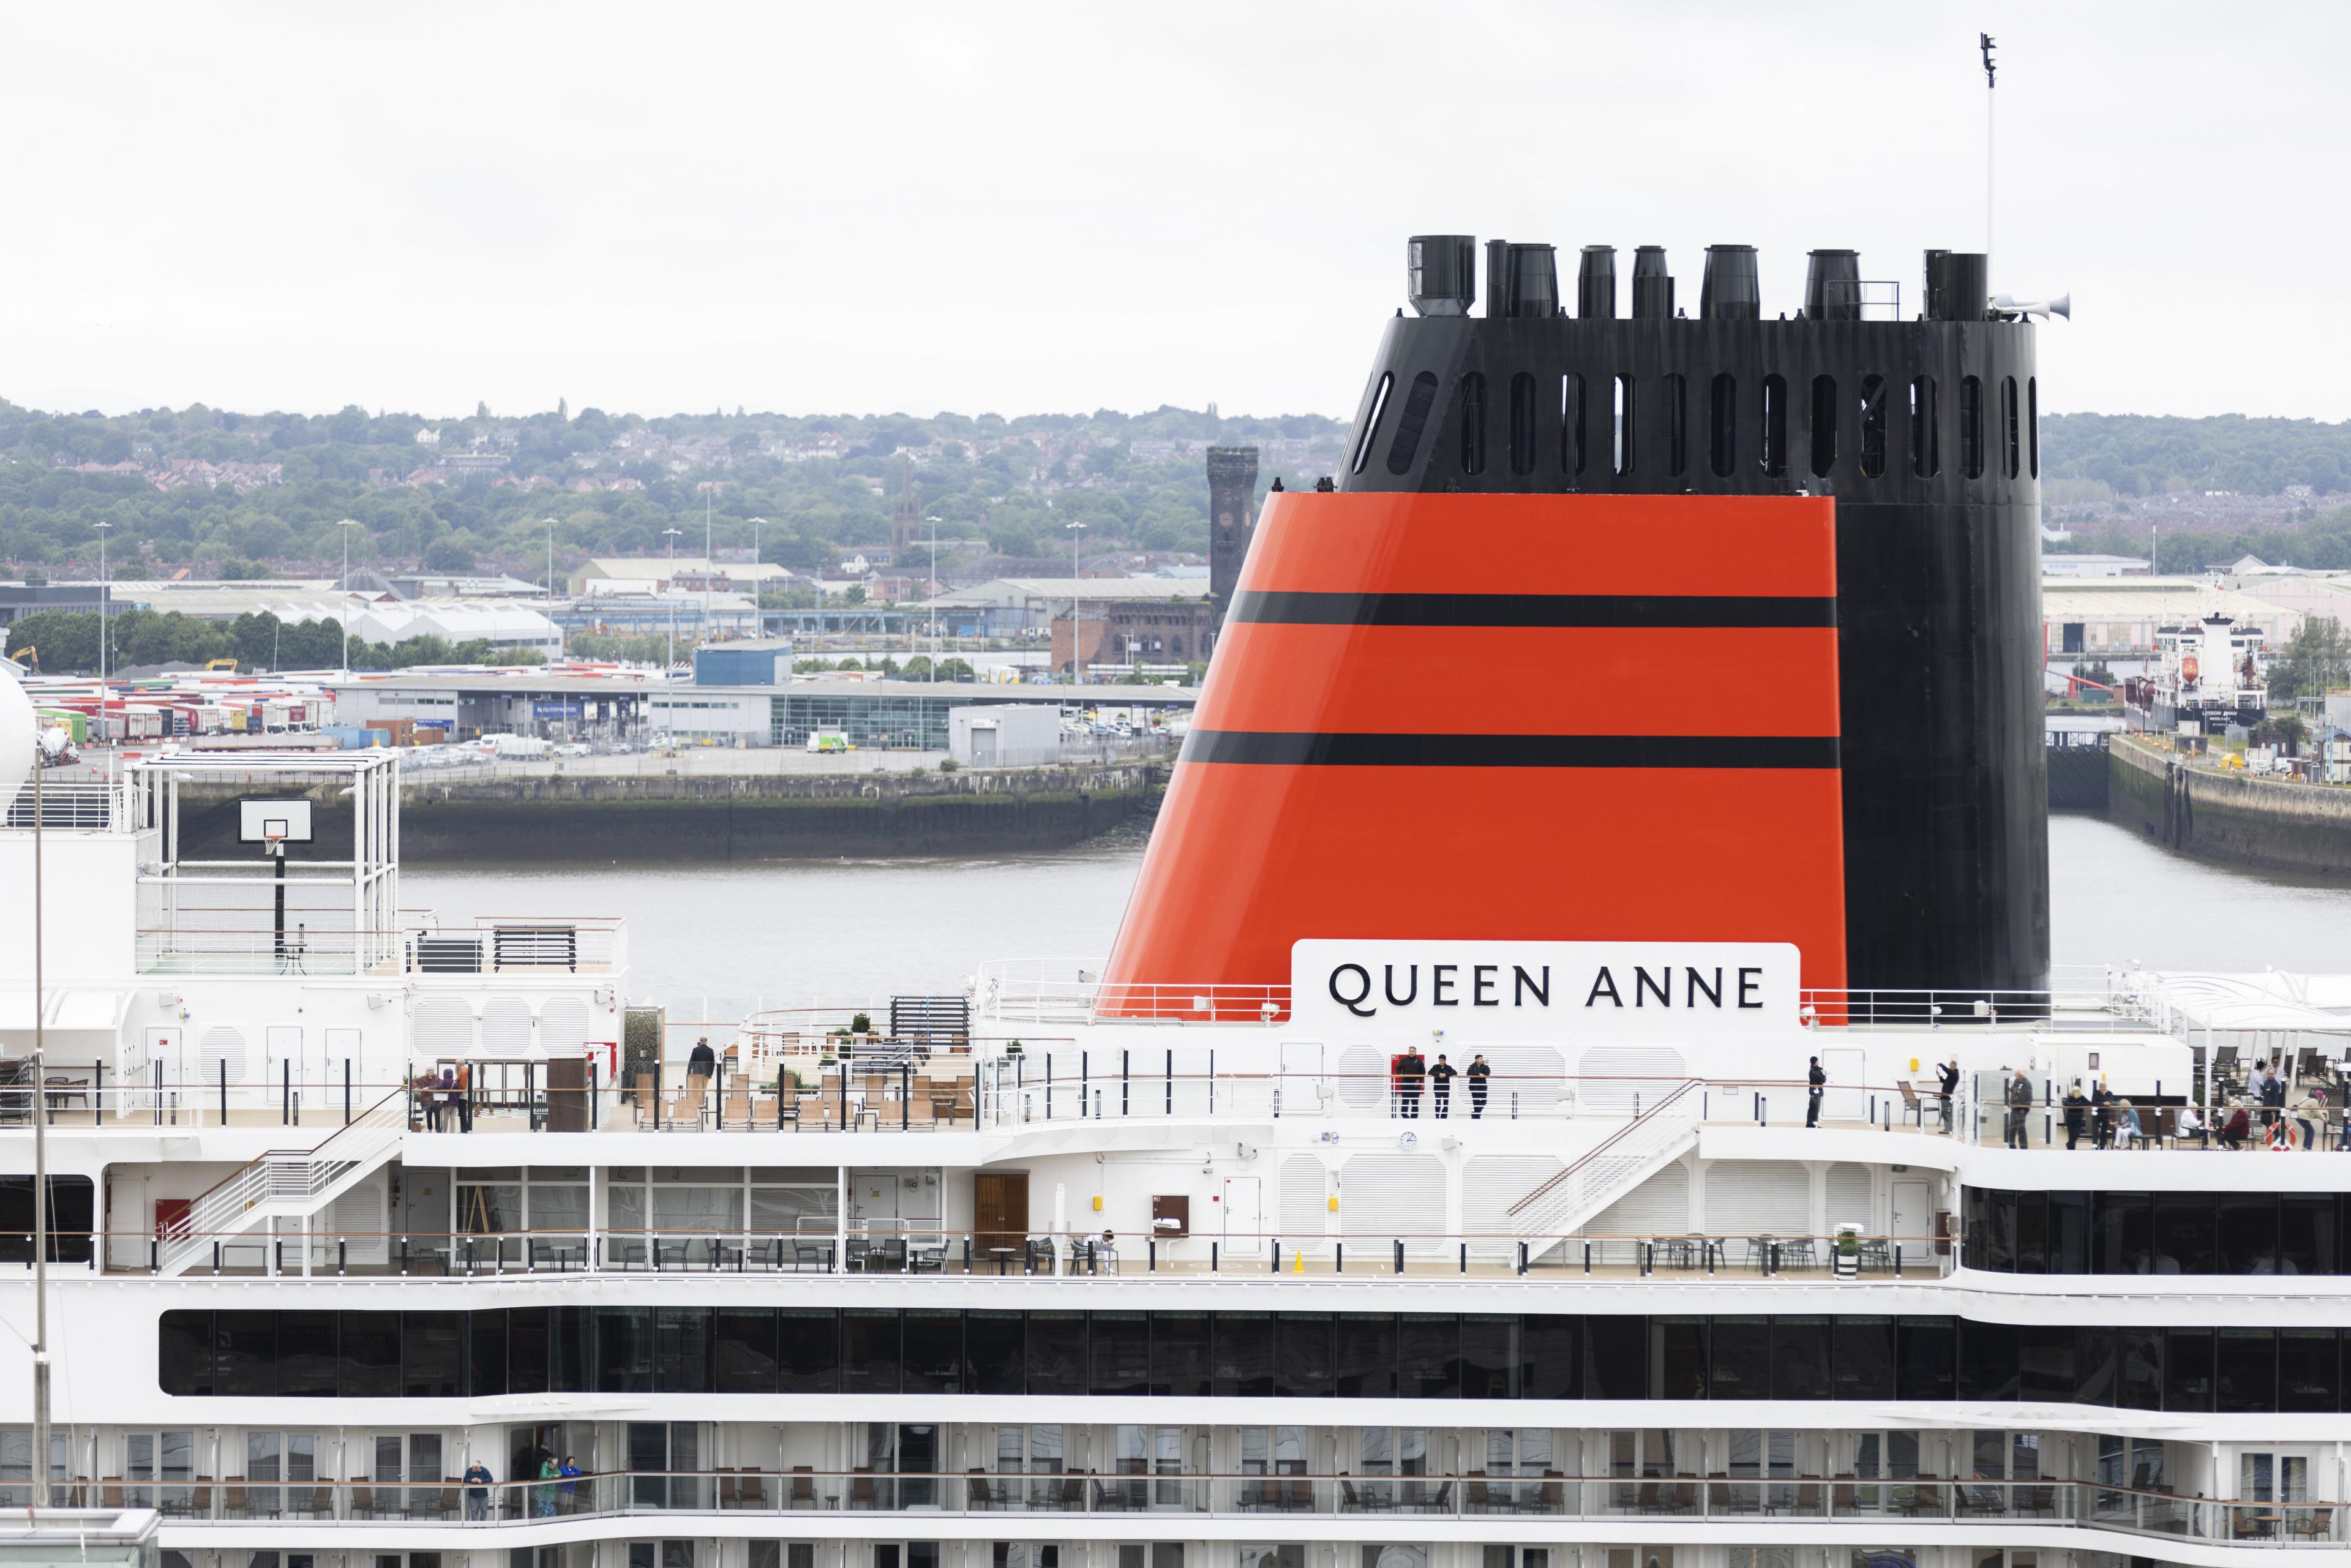 top decks and red funnel of an ocean liner. funnel says queen anne on it